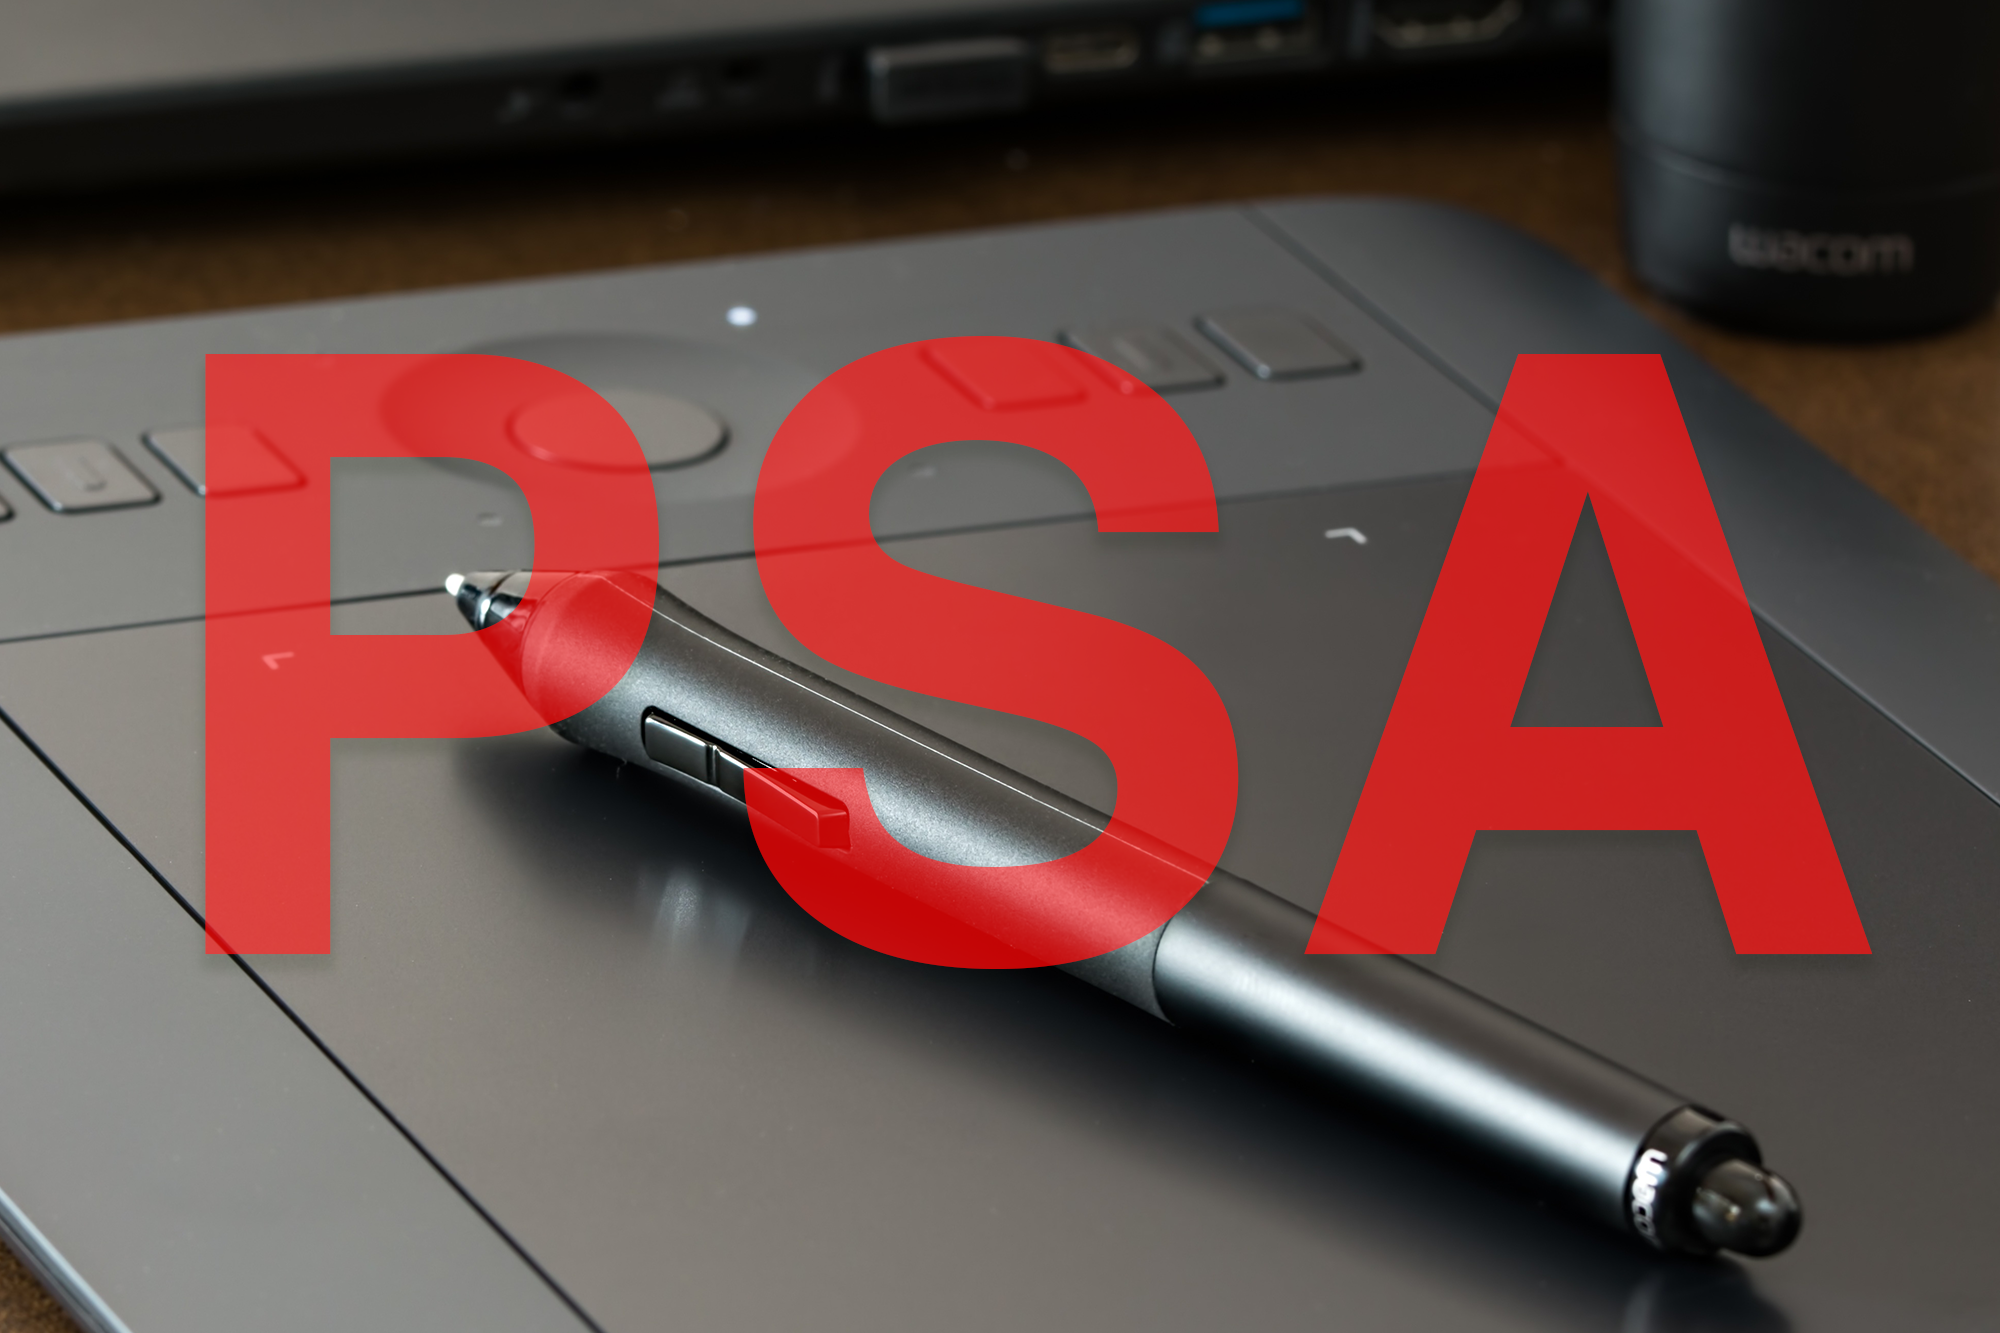 PSA: High Sierra Is Currently Incompatible With Wacom Tablet Driver